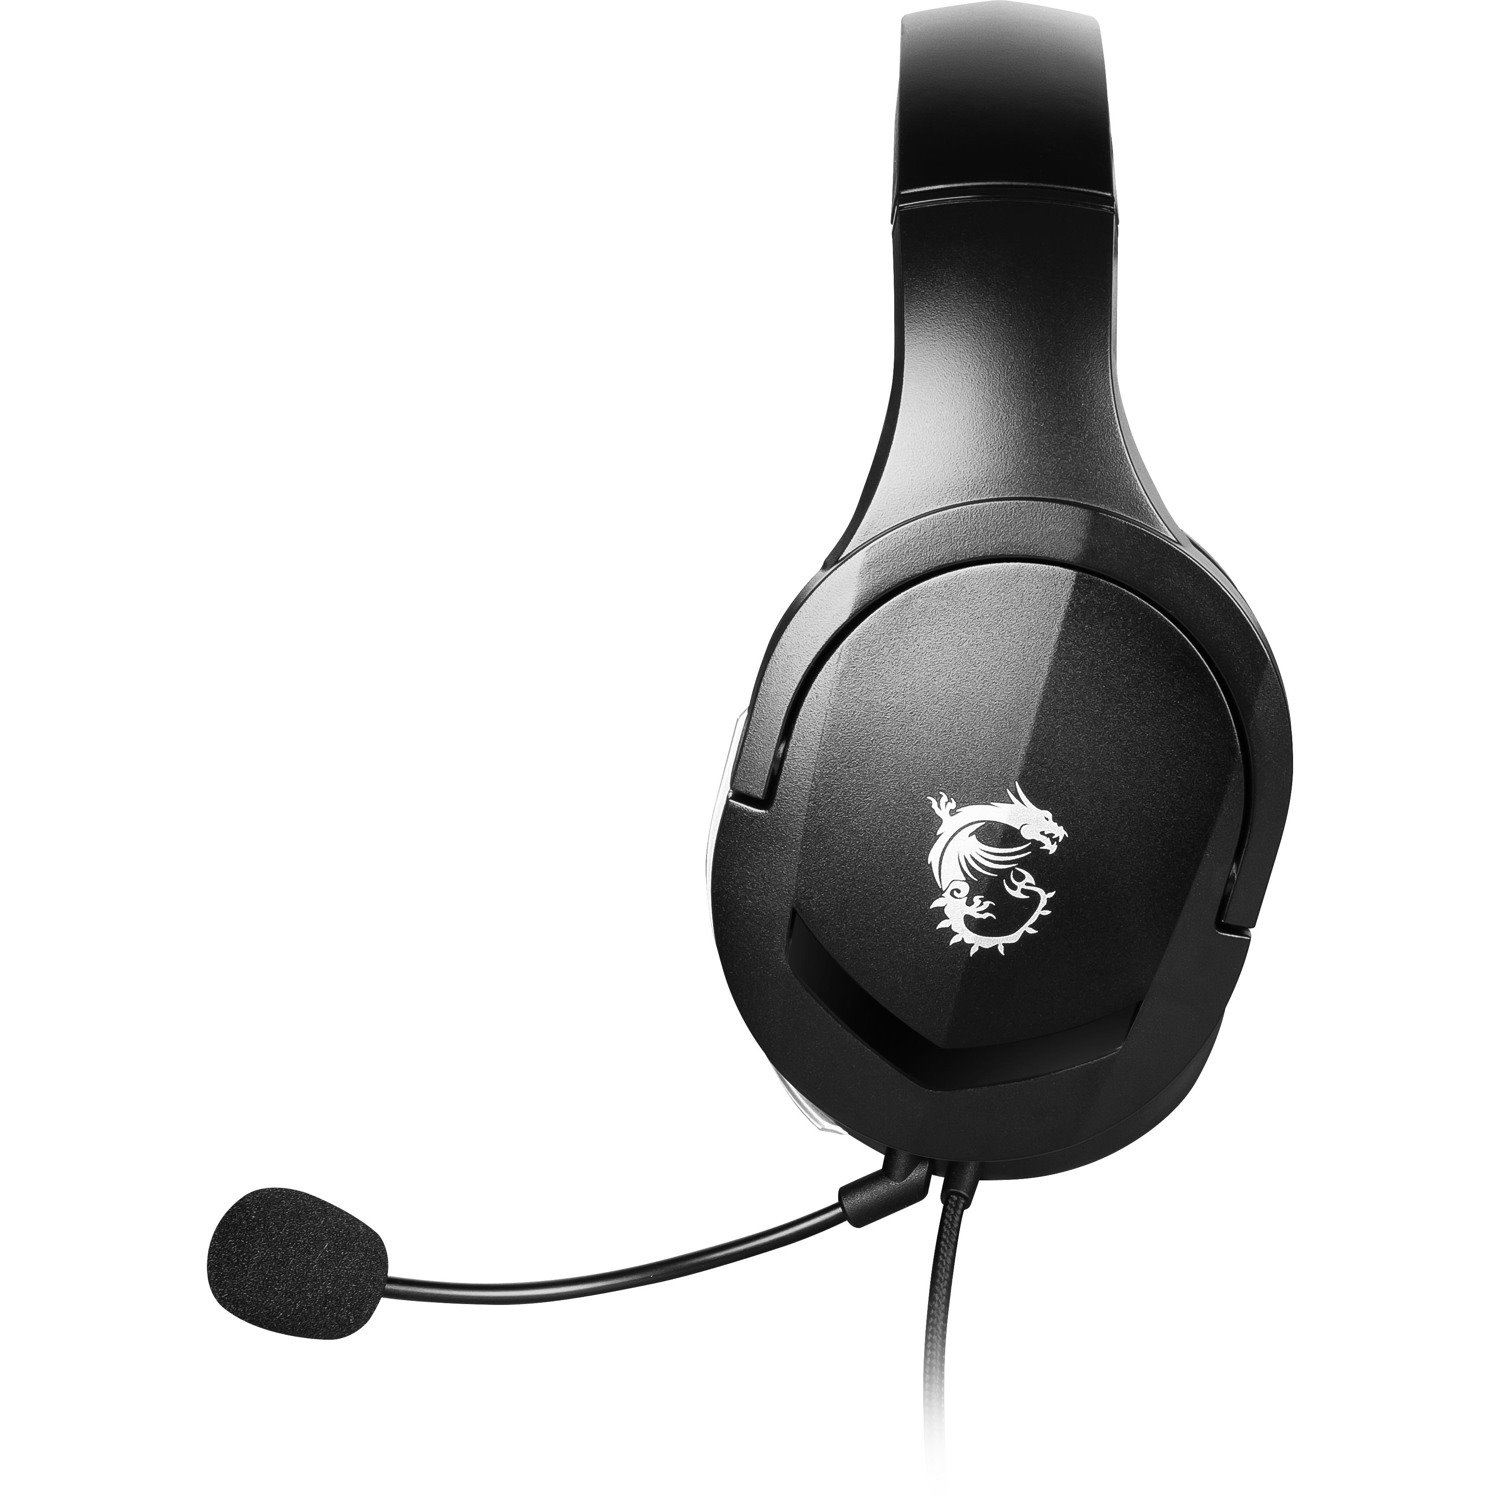 MSI Immerse GH20 Gaming Headset with Microphone